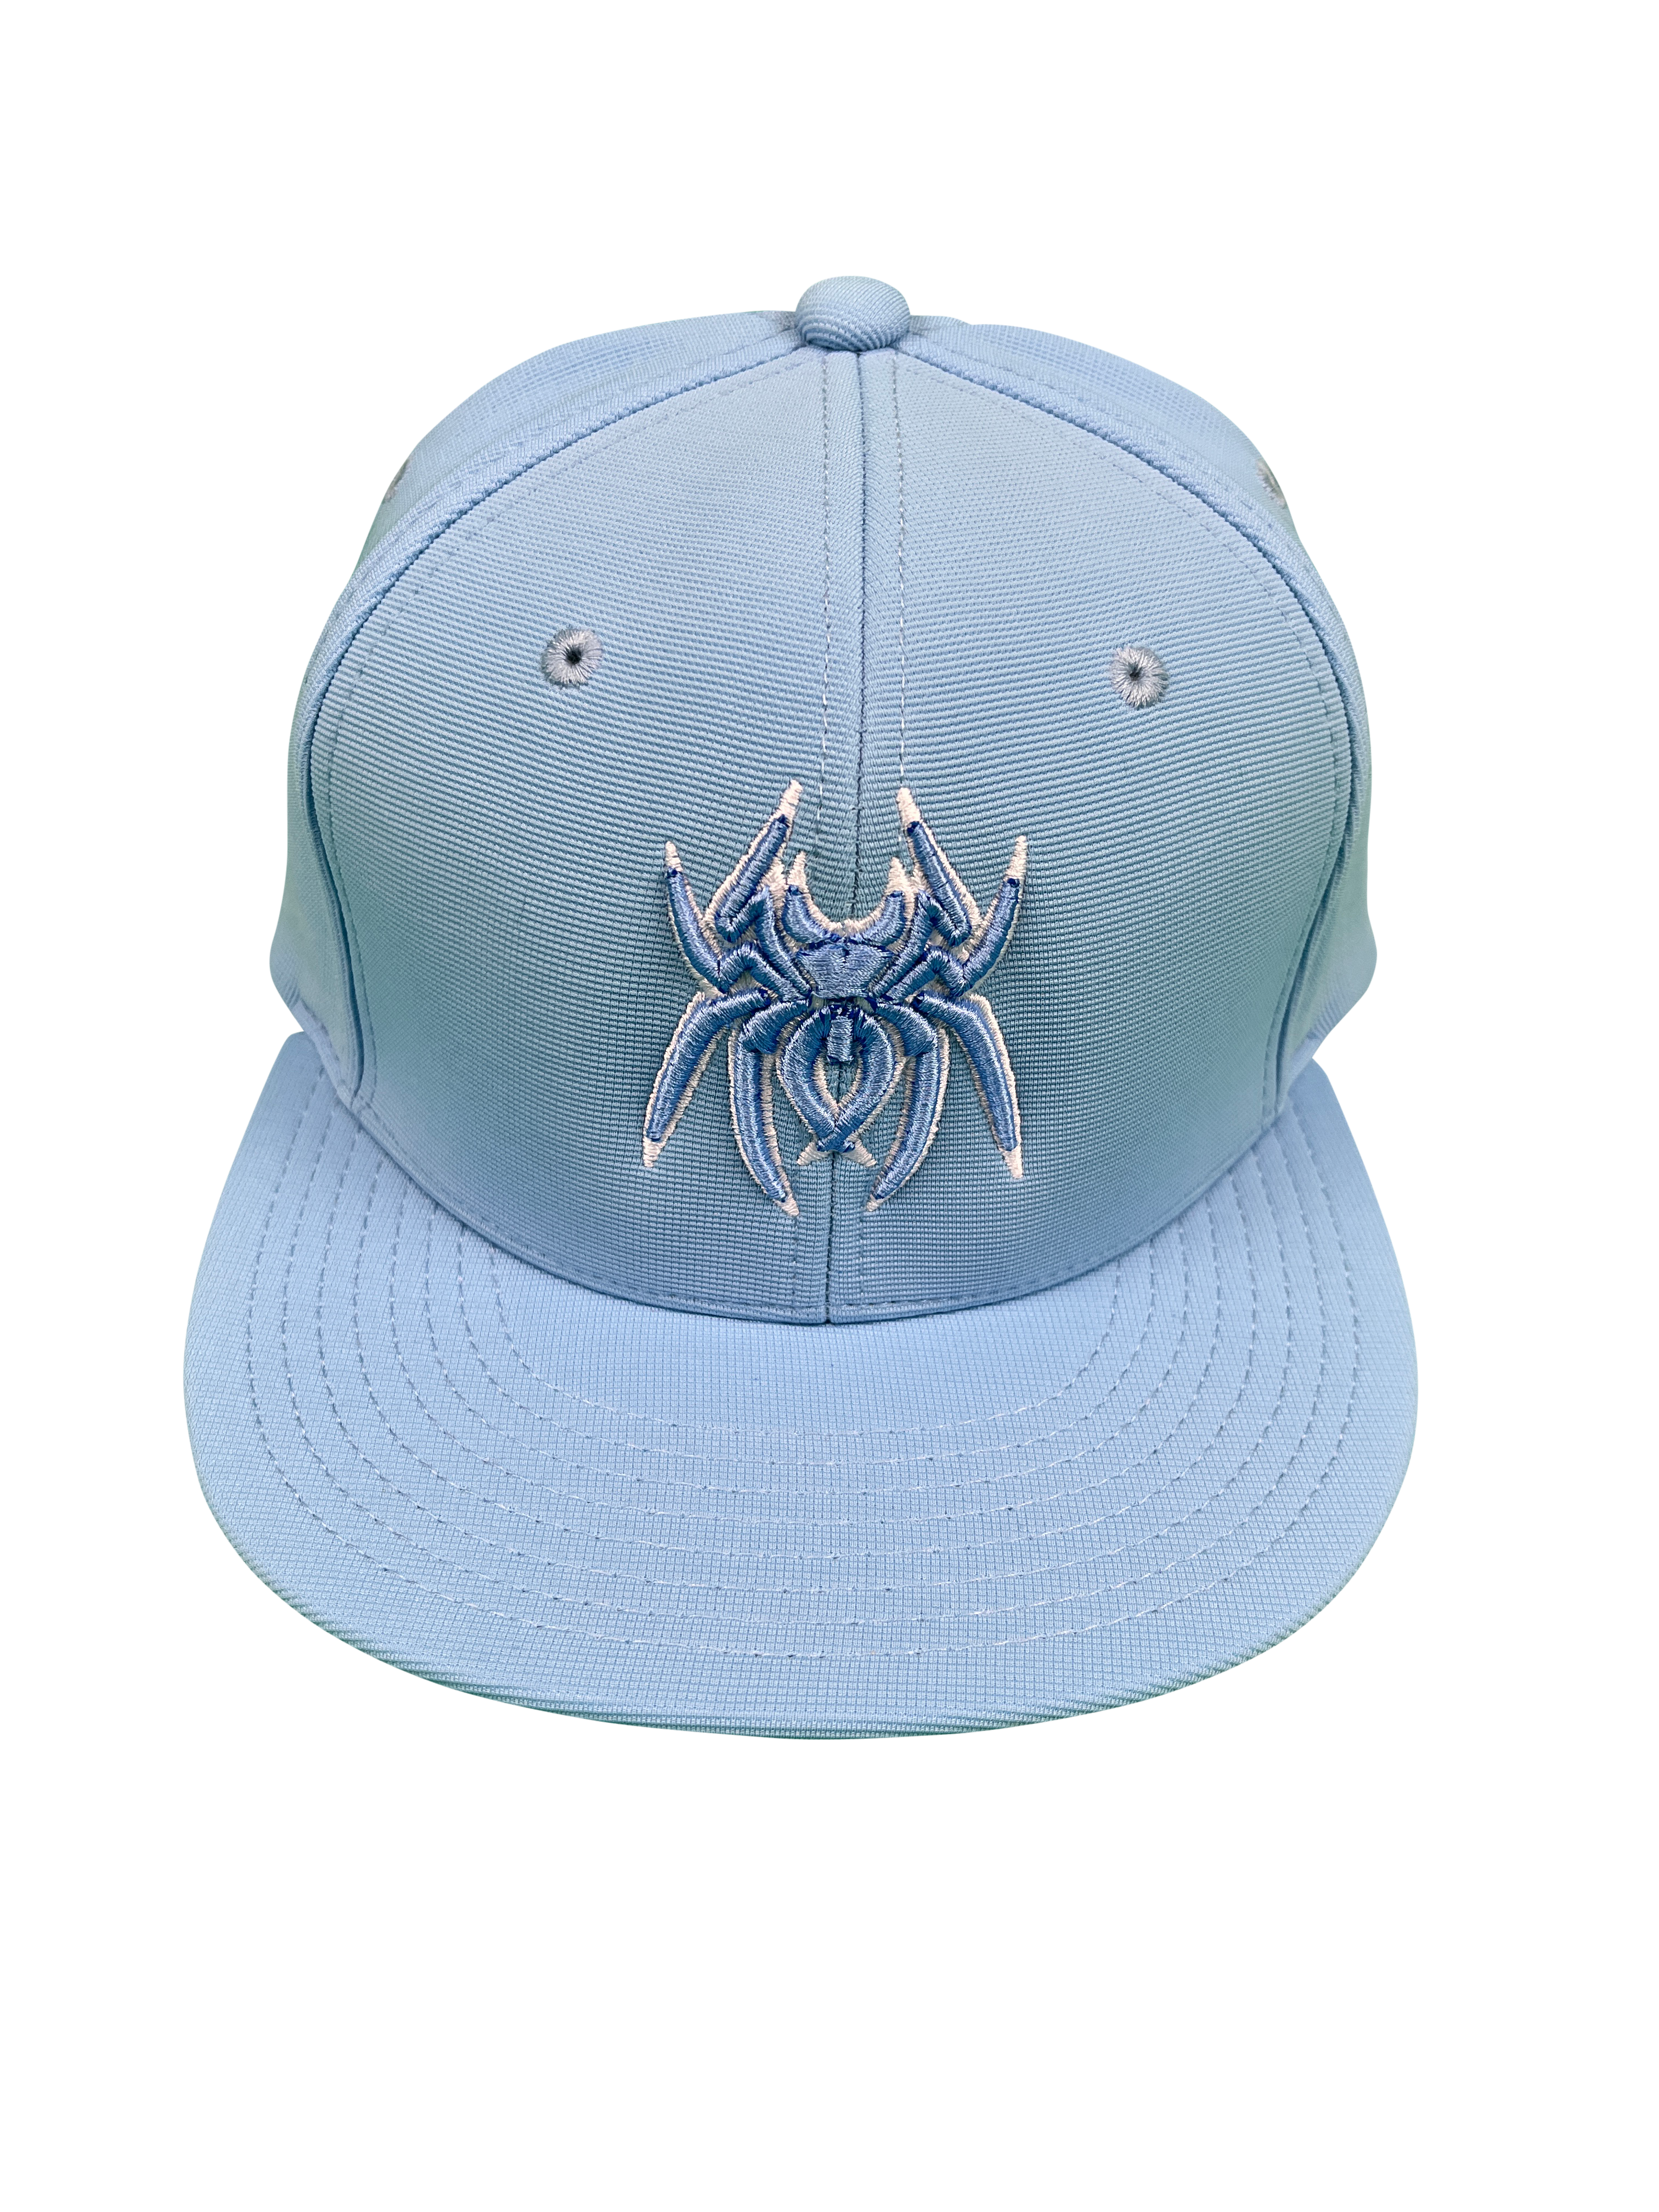 Spiderz Pro Player Performance Hat - Columbia Blue/White